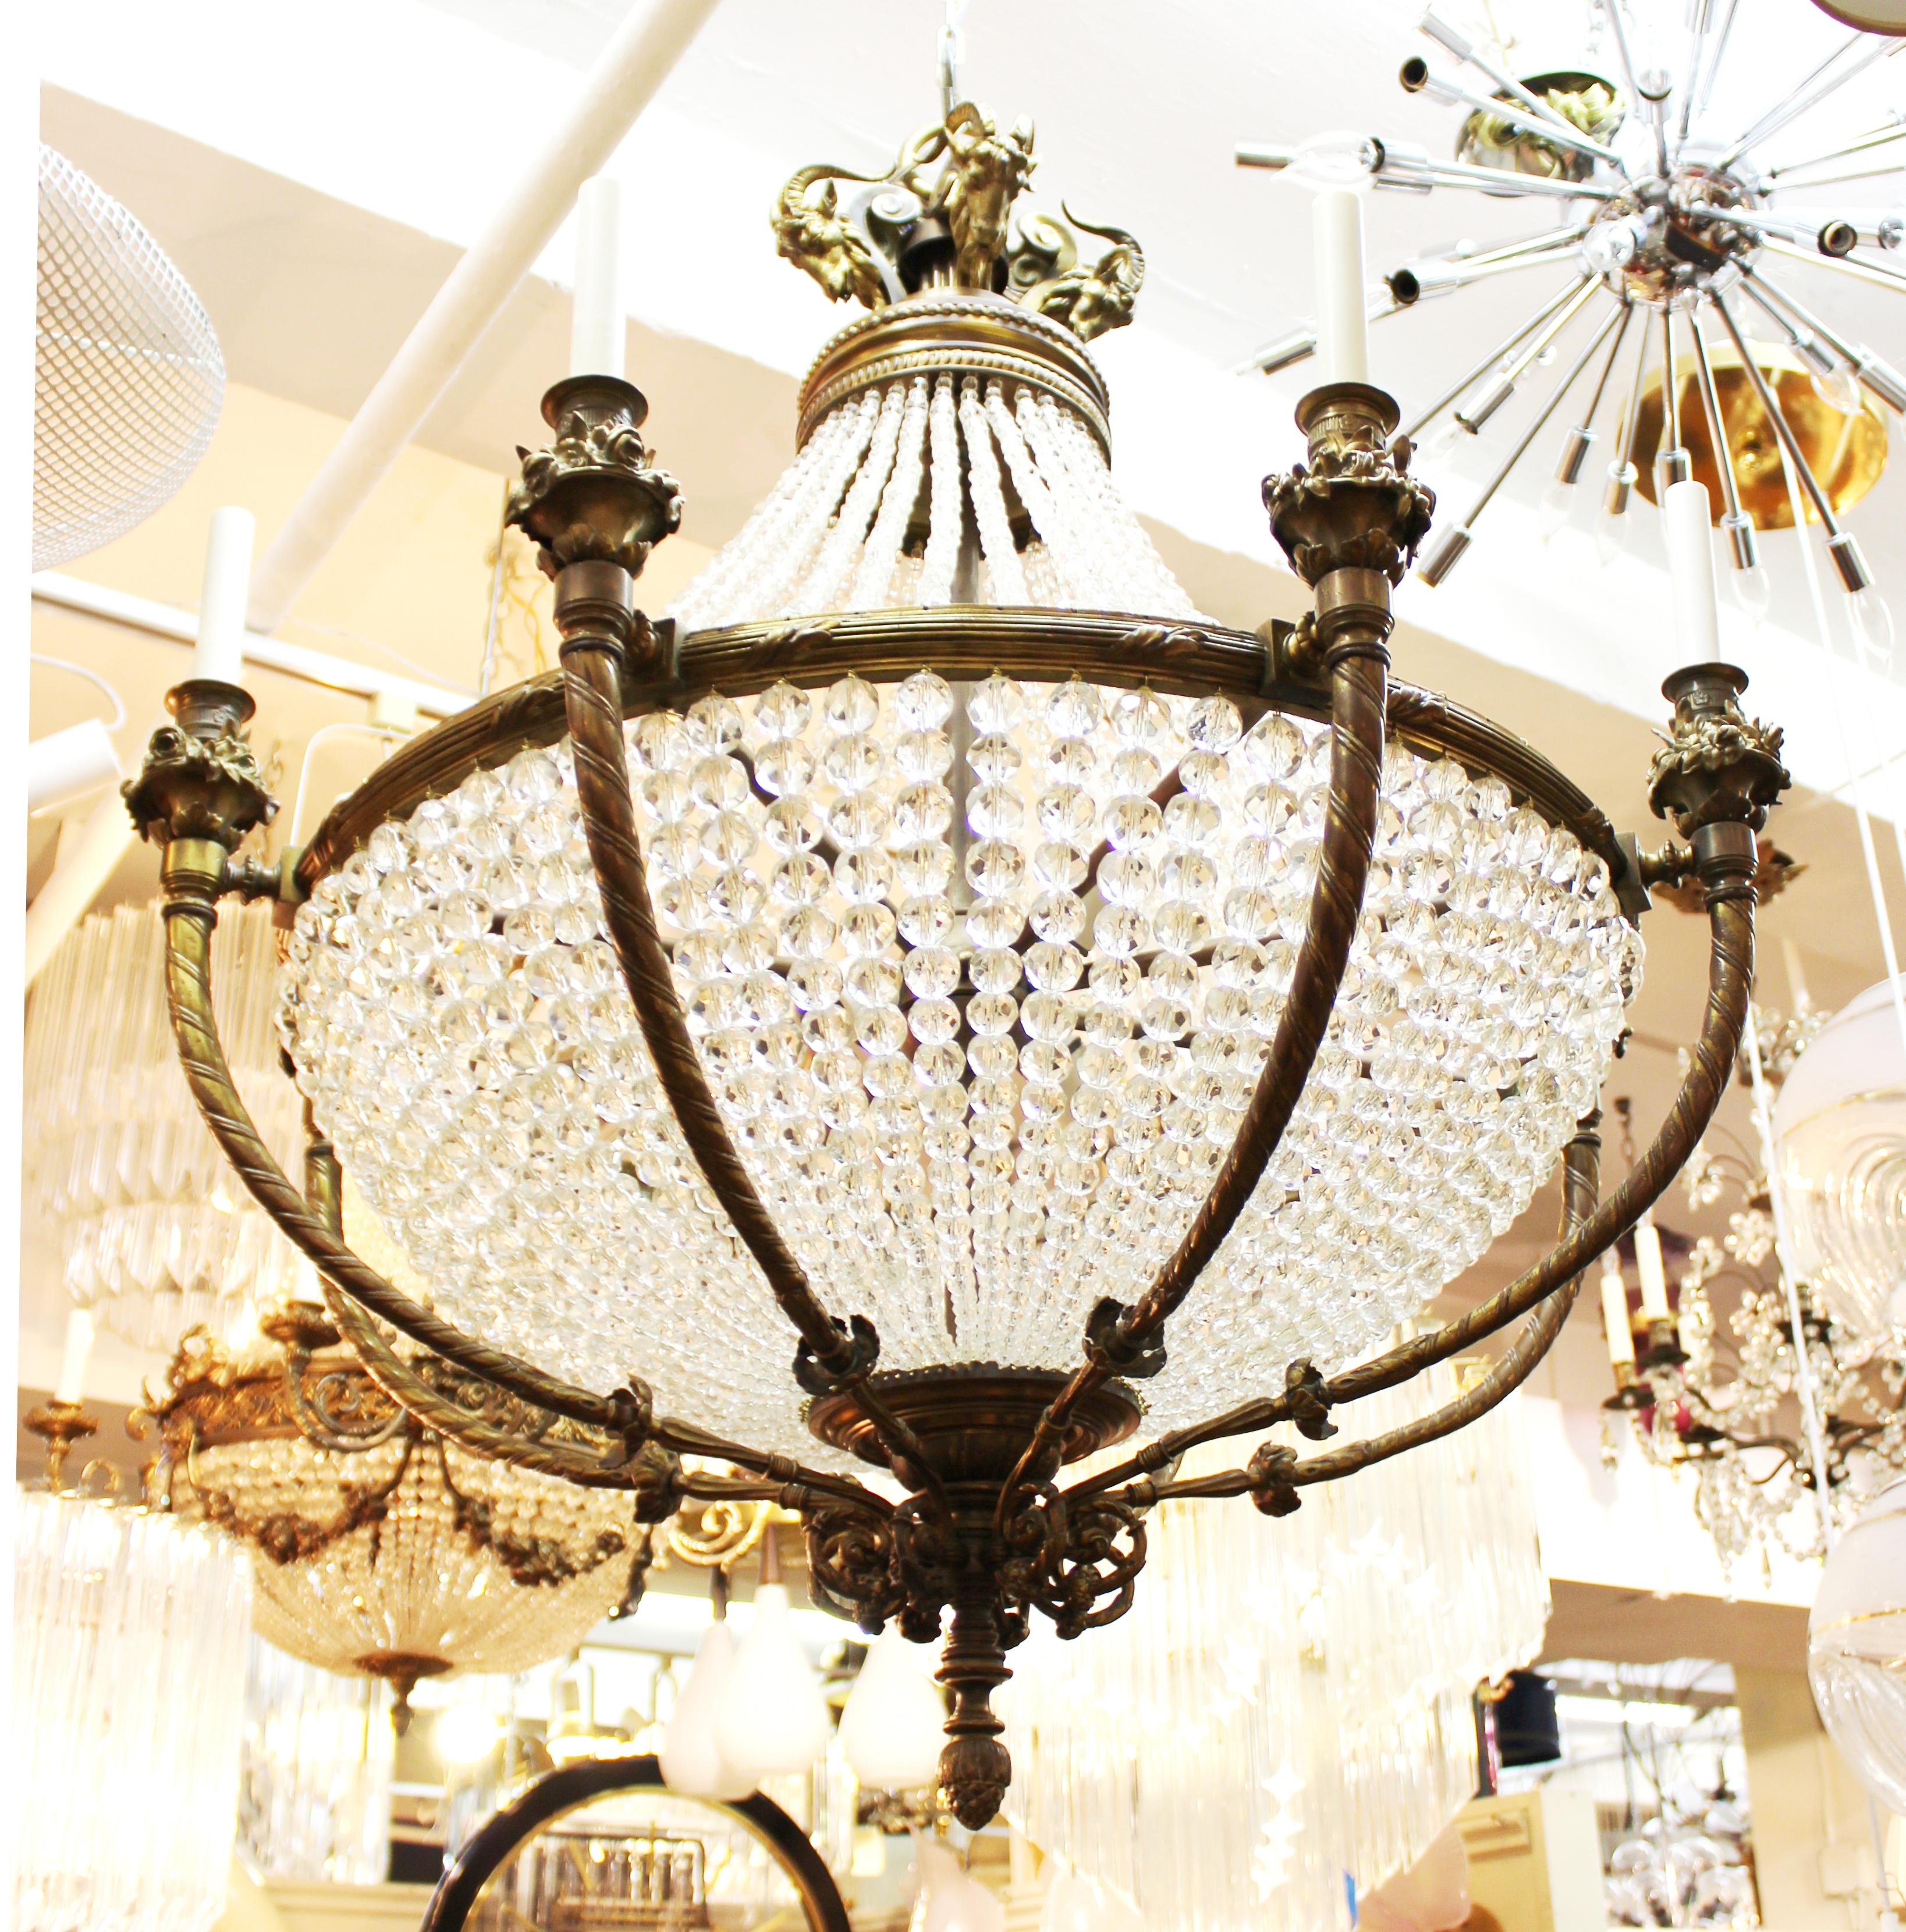 French Belle Époque monumental chandelier in bronze with crystal strands and ram's head embellishments. The piece was likely made during the 1890s in France and is in great vintage condition with age-appropriate wear.